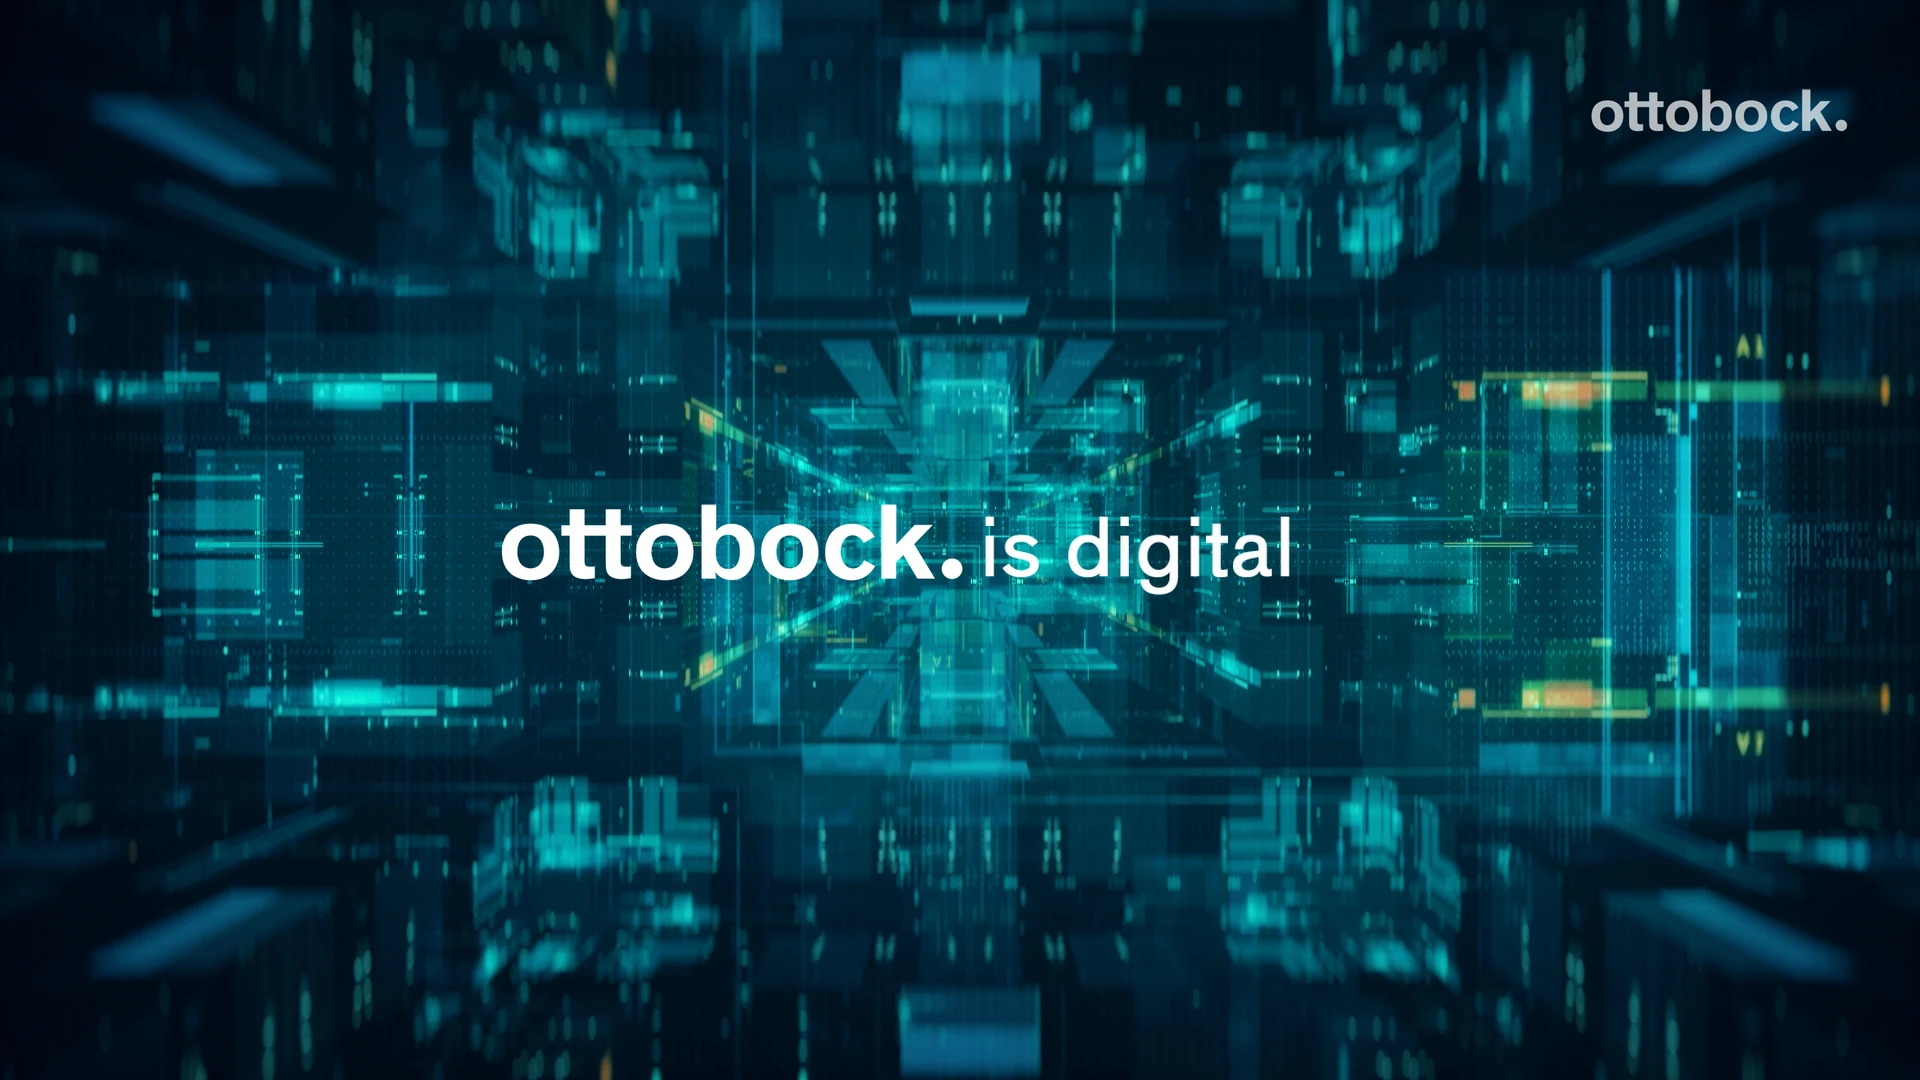 How Ottobock Increased On-Time Delivery - valantic